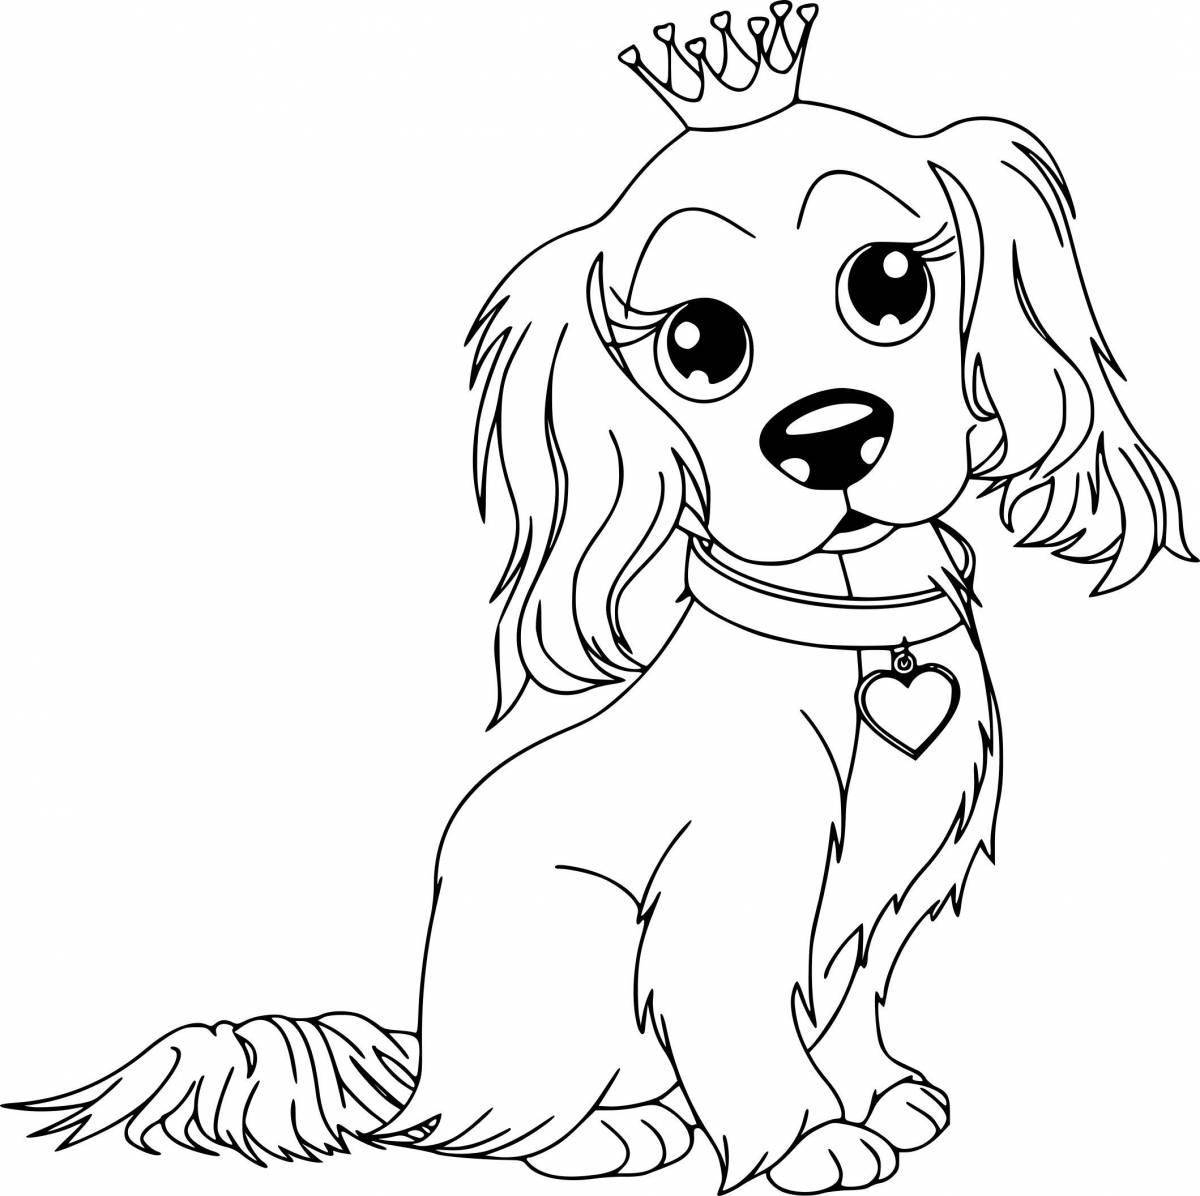 Friendly cute dog coloring book